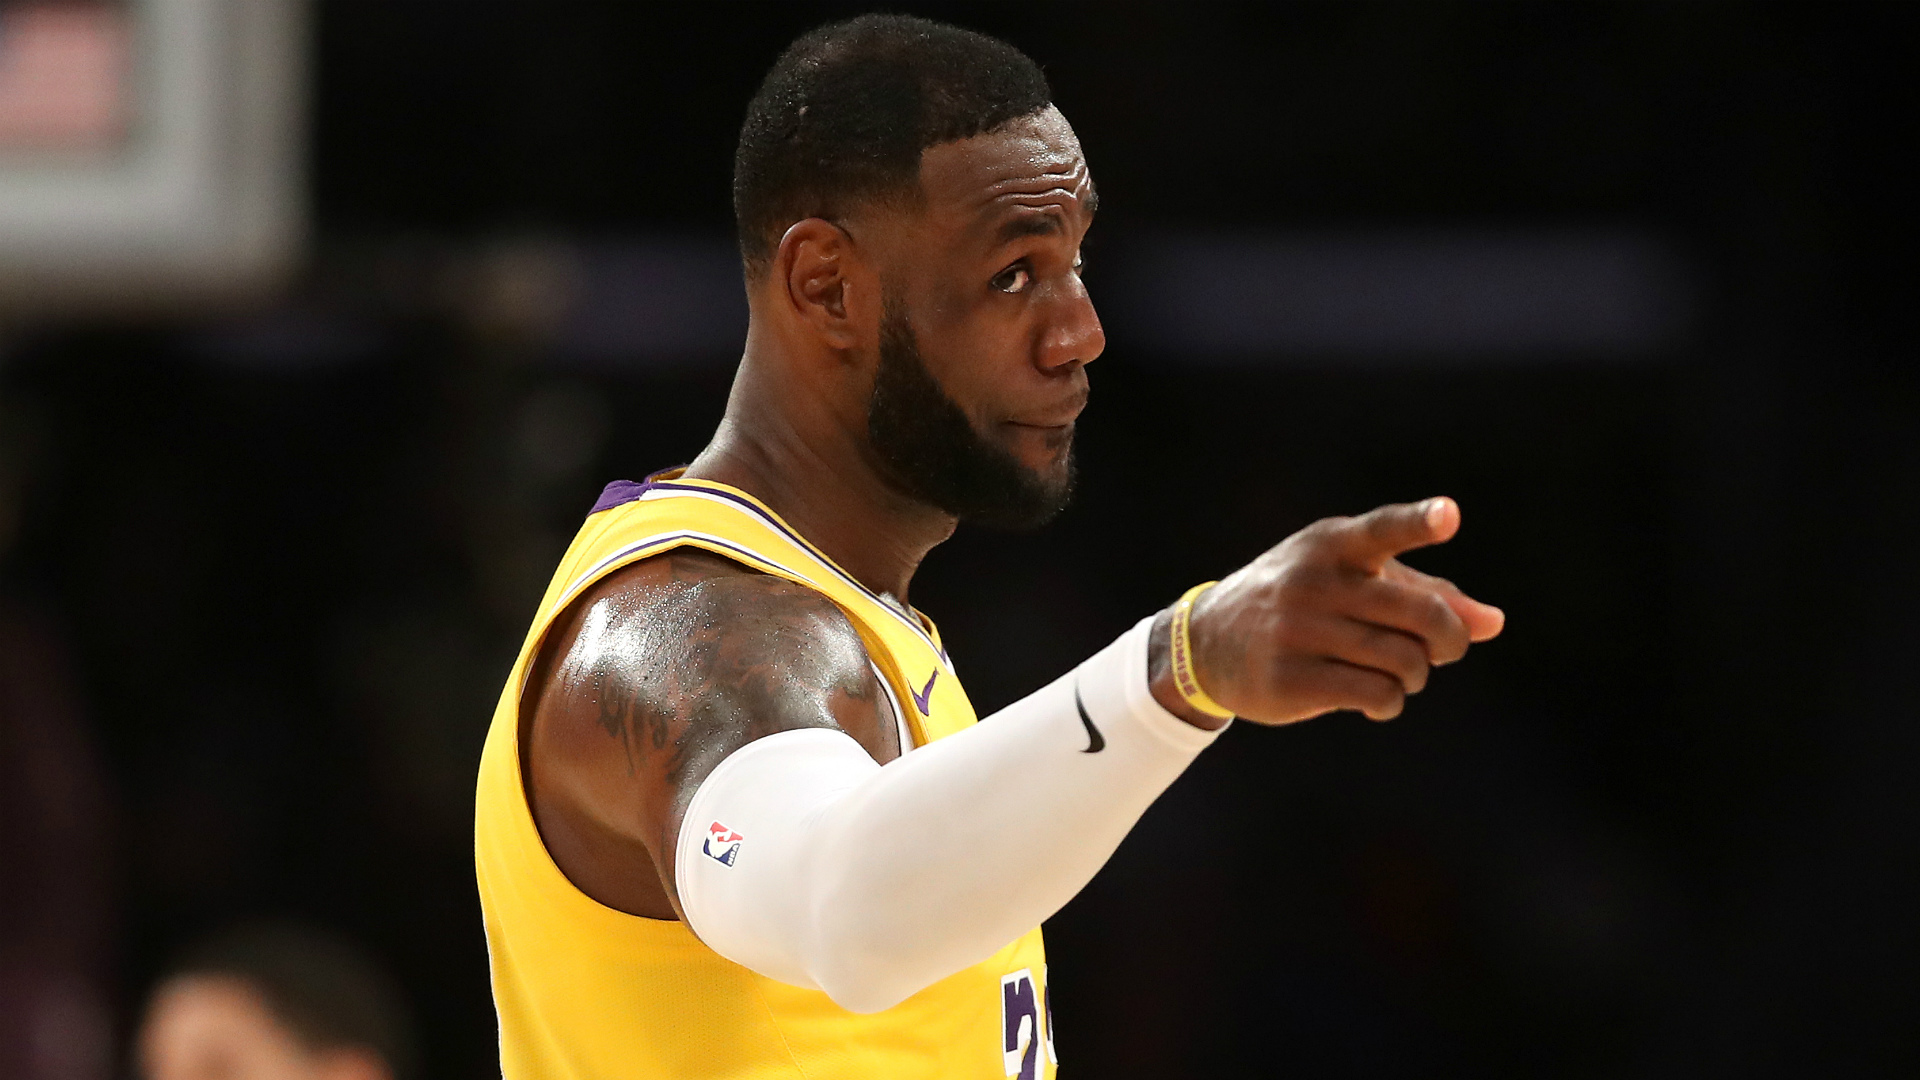 The Los Angeles Lakers must sign free agents in the offseason, LeBron James said.